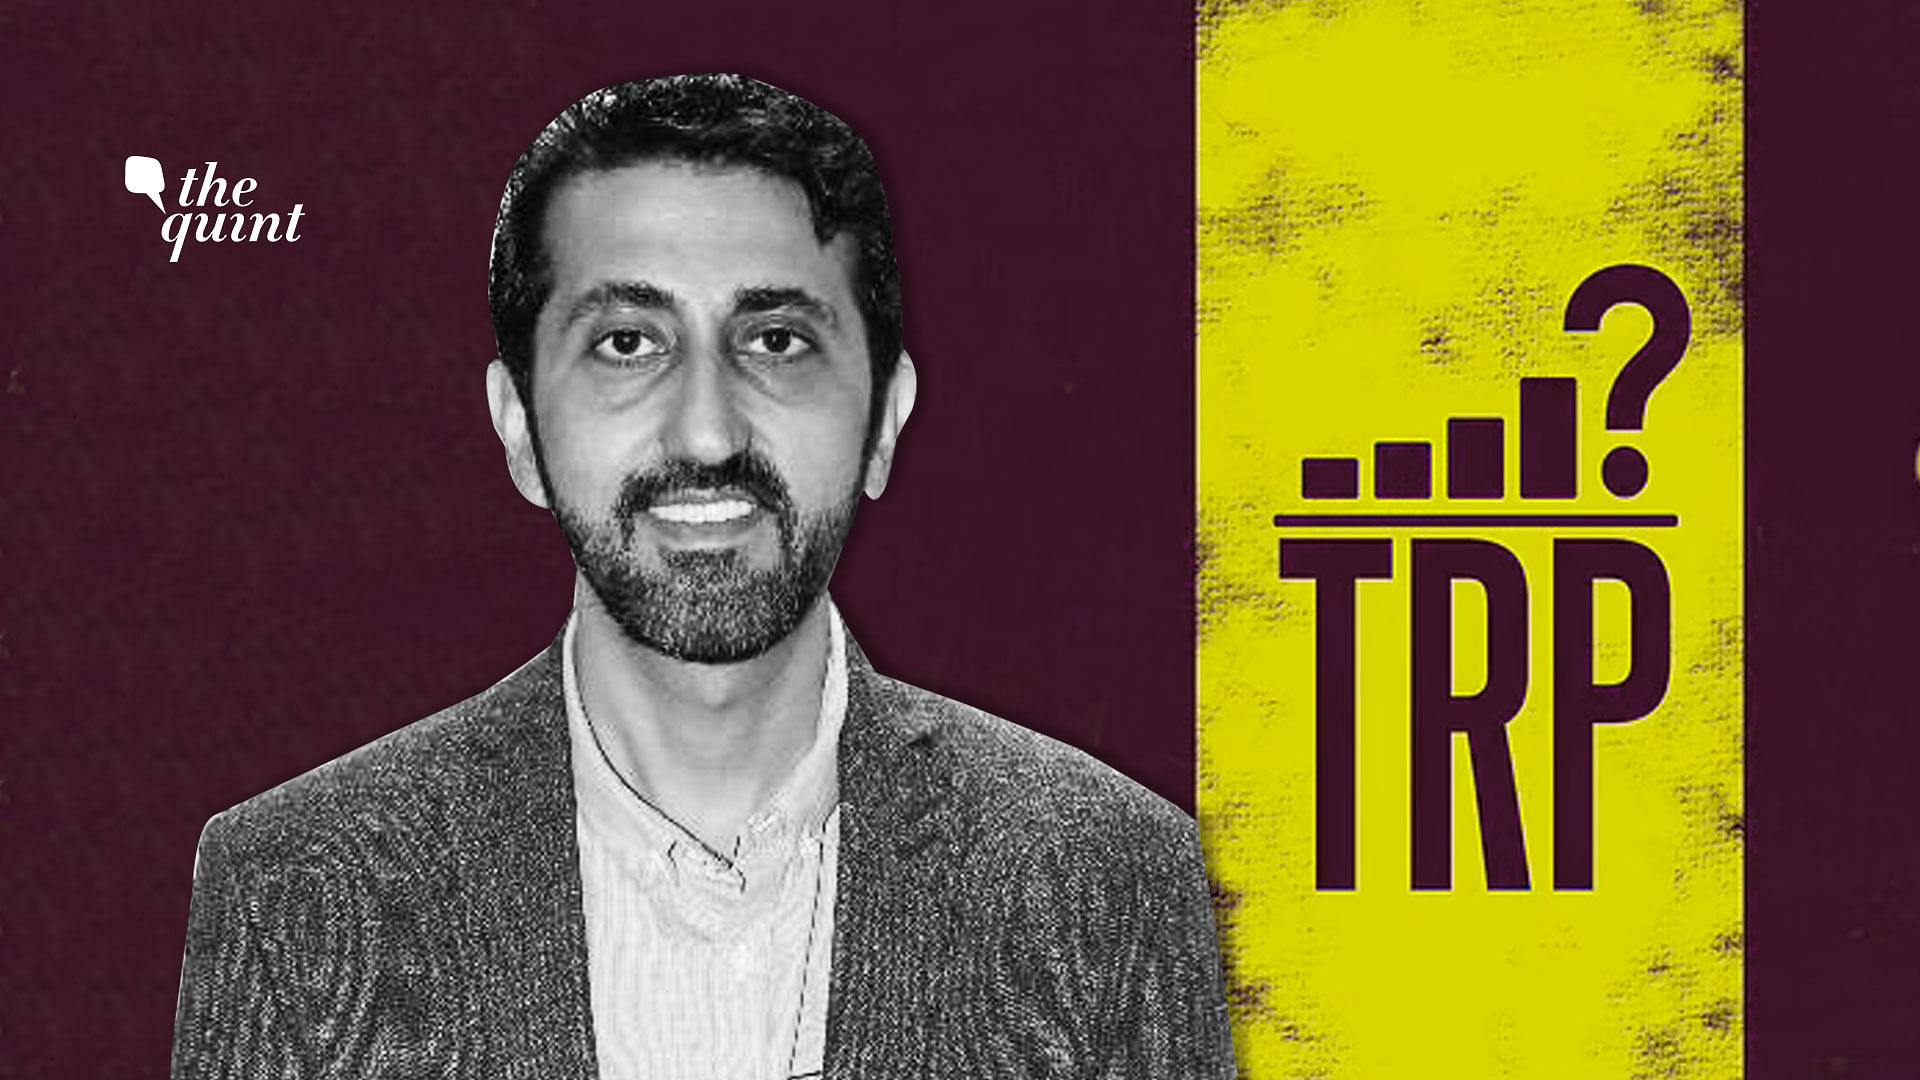 Republic TV CEO Vikas Khanchandani is the thirteenth person to be arrested in the TRP manipulation case